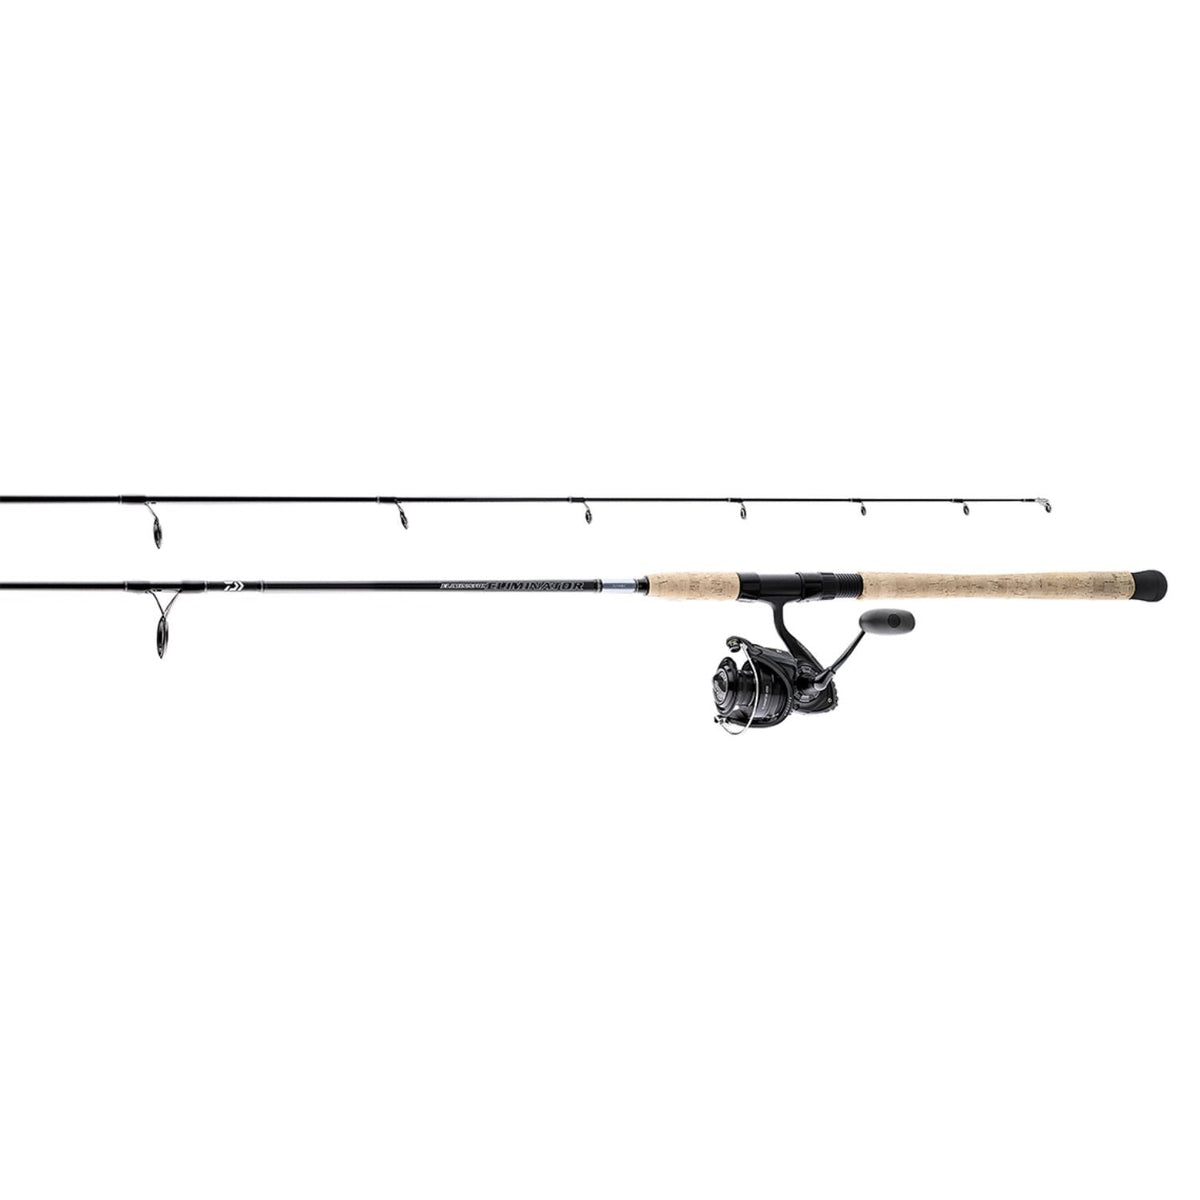 Favorite Fishing Army Spinning Crappie Combo Rod ARM602M10 6ft